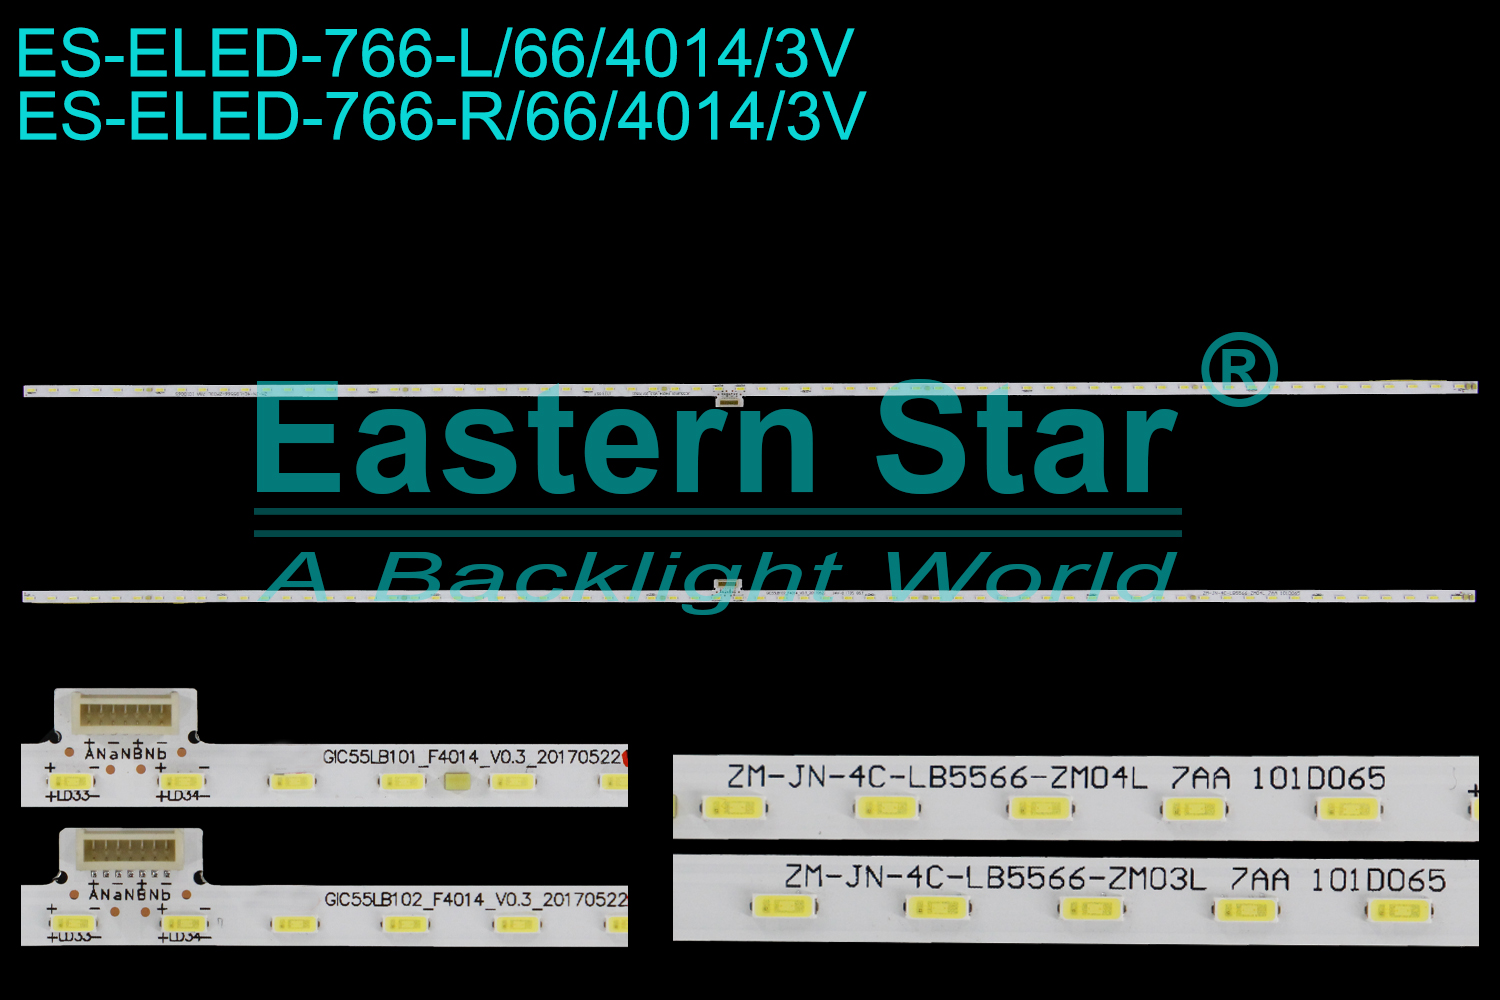 ES-ELED-766 ELED/EDGE TV backlight use for 55''  Tcl 55P6/55A860U L:GIC55LB101_F4014_V0.3_20170522 ZM-JN-4C-LB5566-ZM03L 7AA 101D065  R:GIC55LB102_F4014_V0.3_20170522 ZM-JN-4C-LB5566-ZM04L 7AA 101D065 LED STRIPS(2)